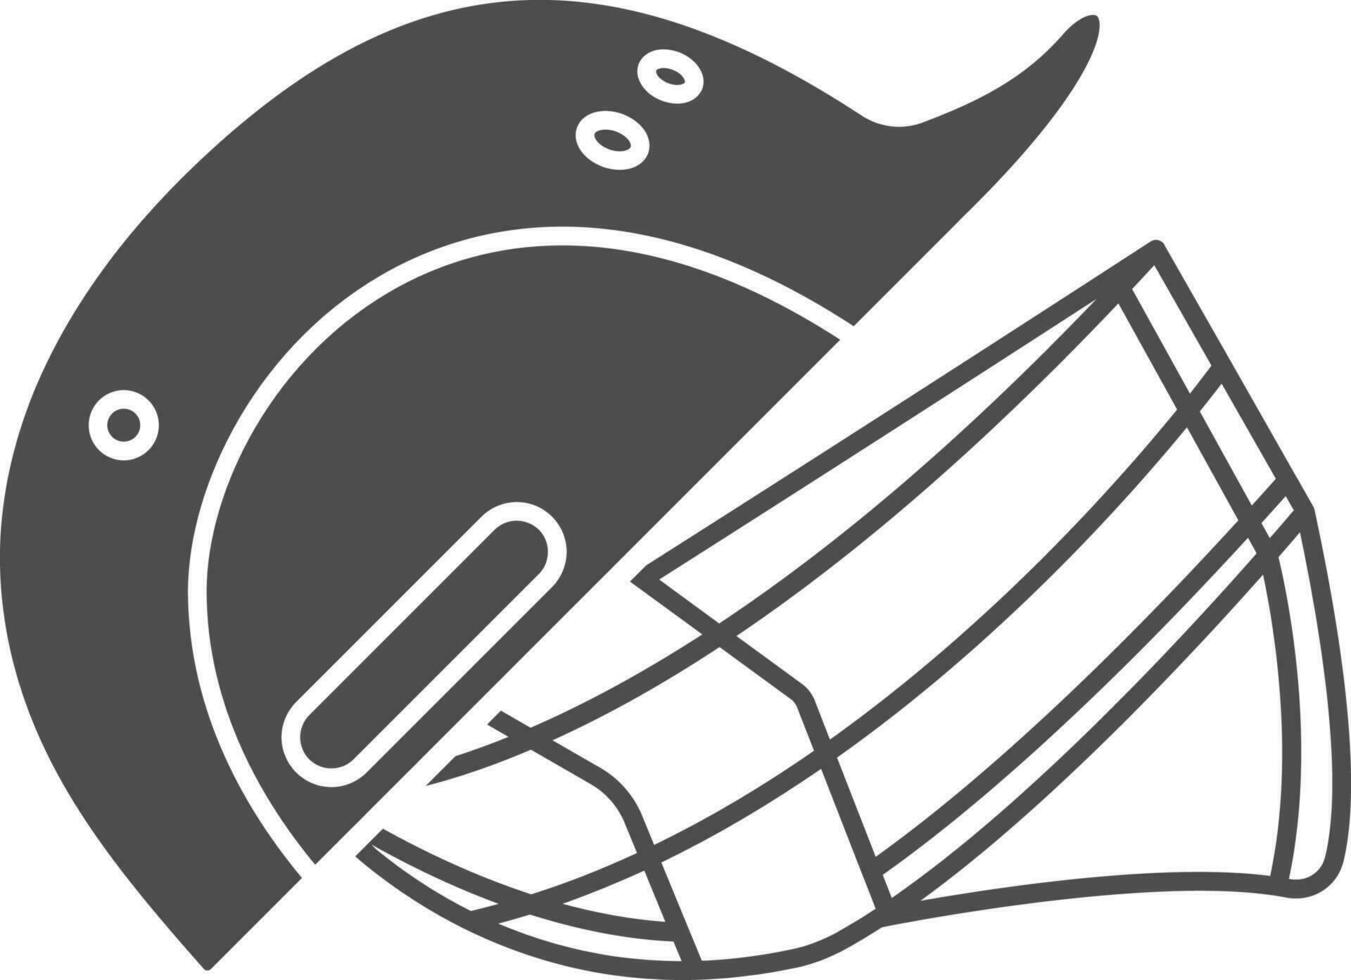 Cricket Helmet Icon In Gray And White Color. vector